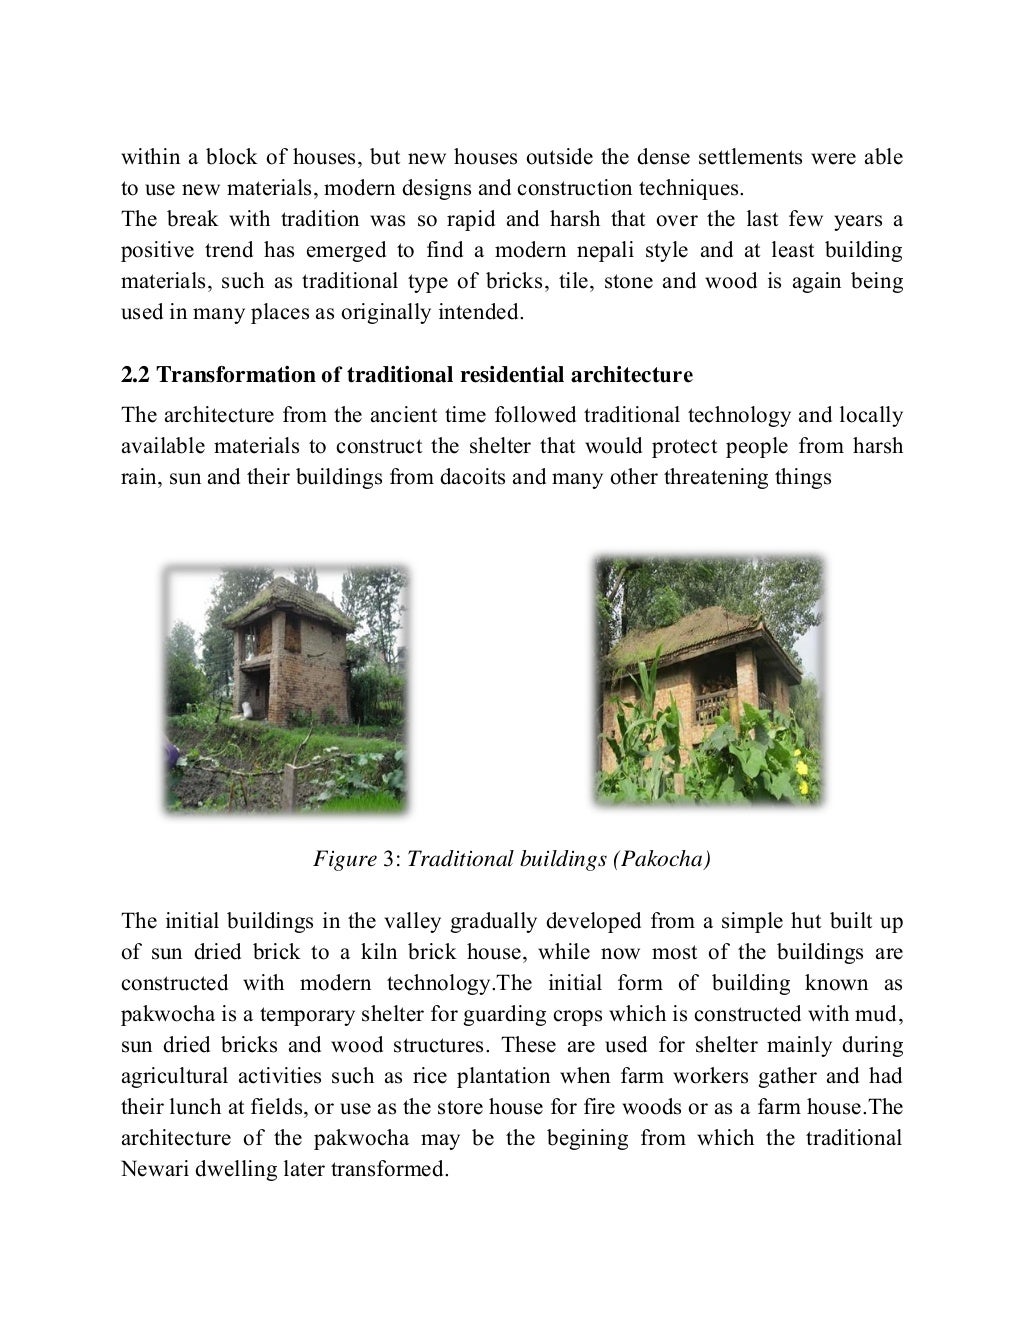 documentation-on-traditional-residential-dwelling